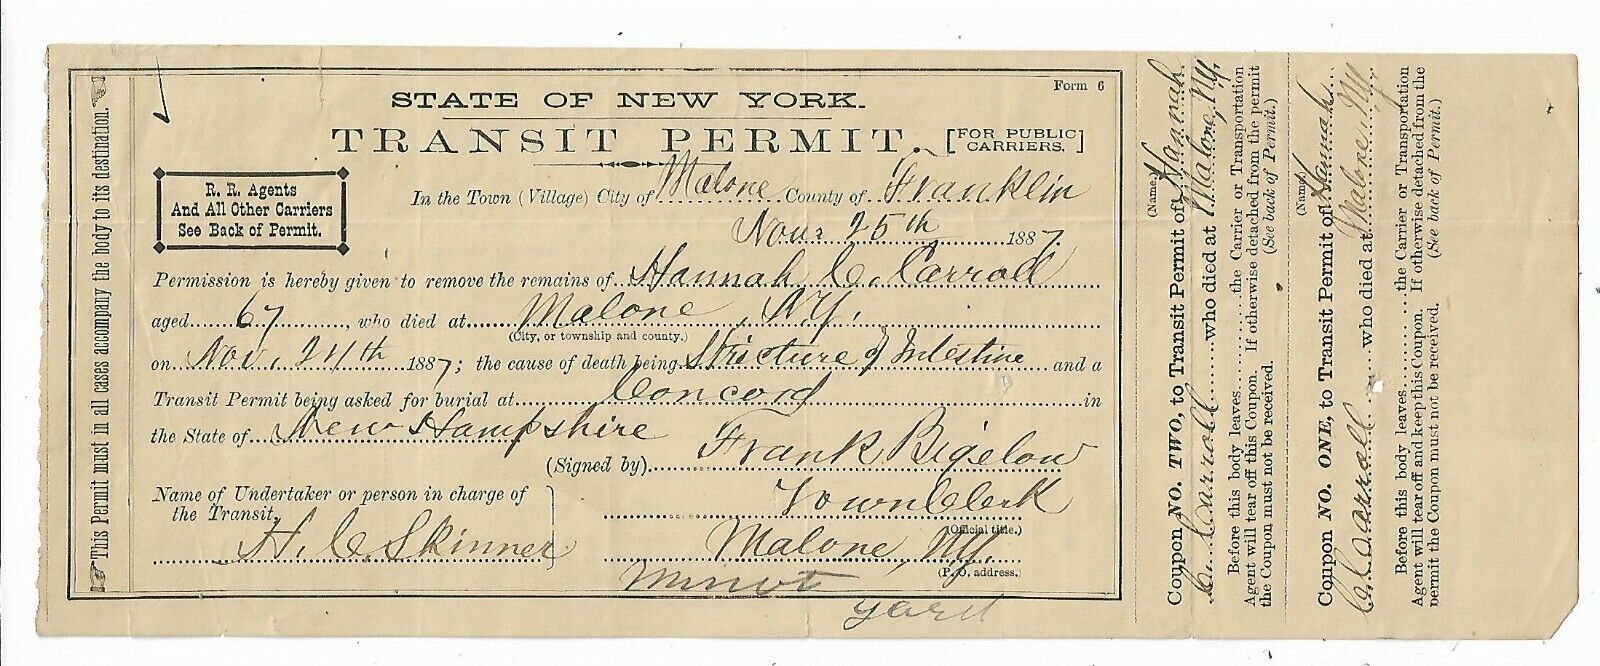 1887 Transit Permit Corpse Dead Body Remains Carroll Malone Ny Concord Nh Burial